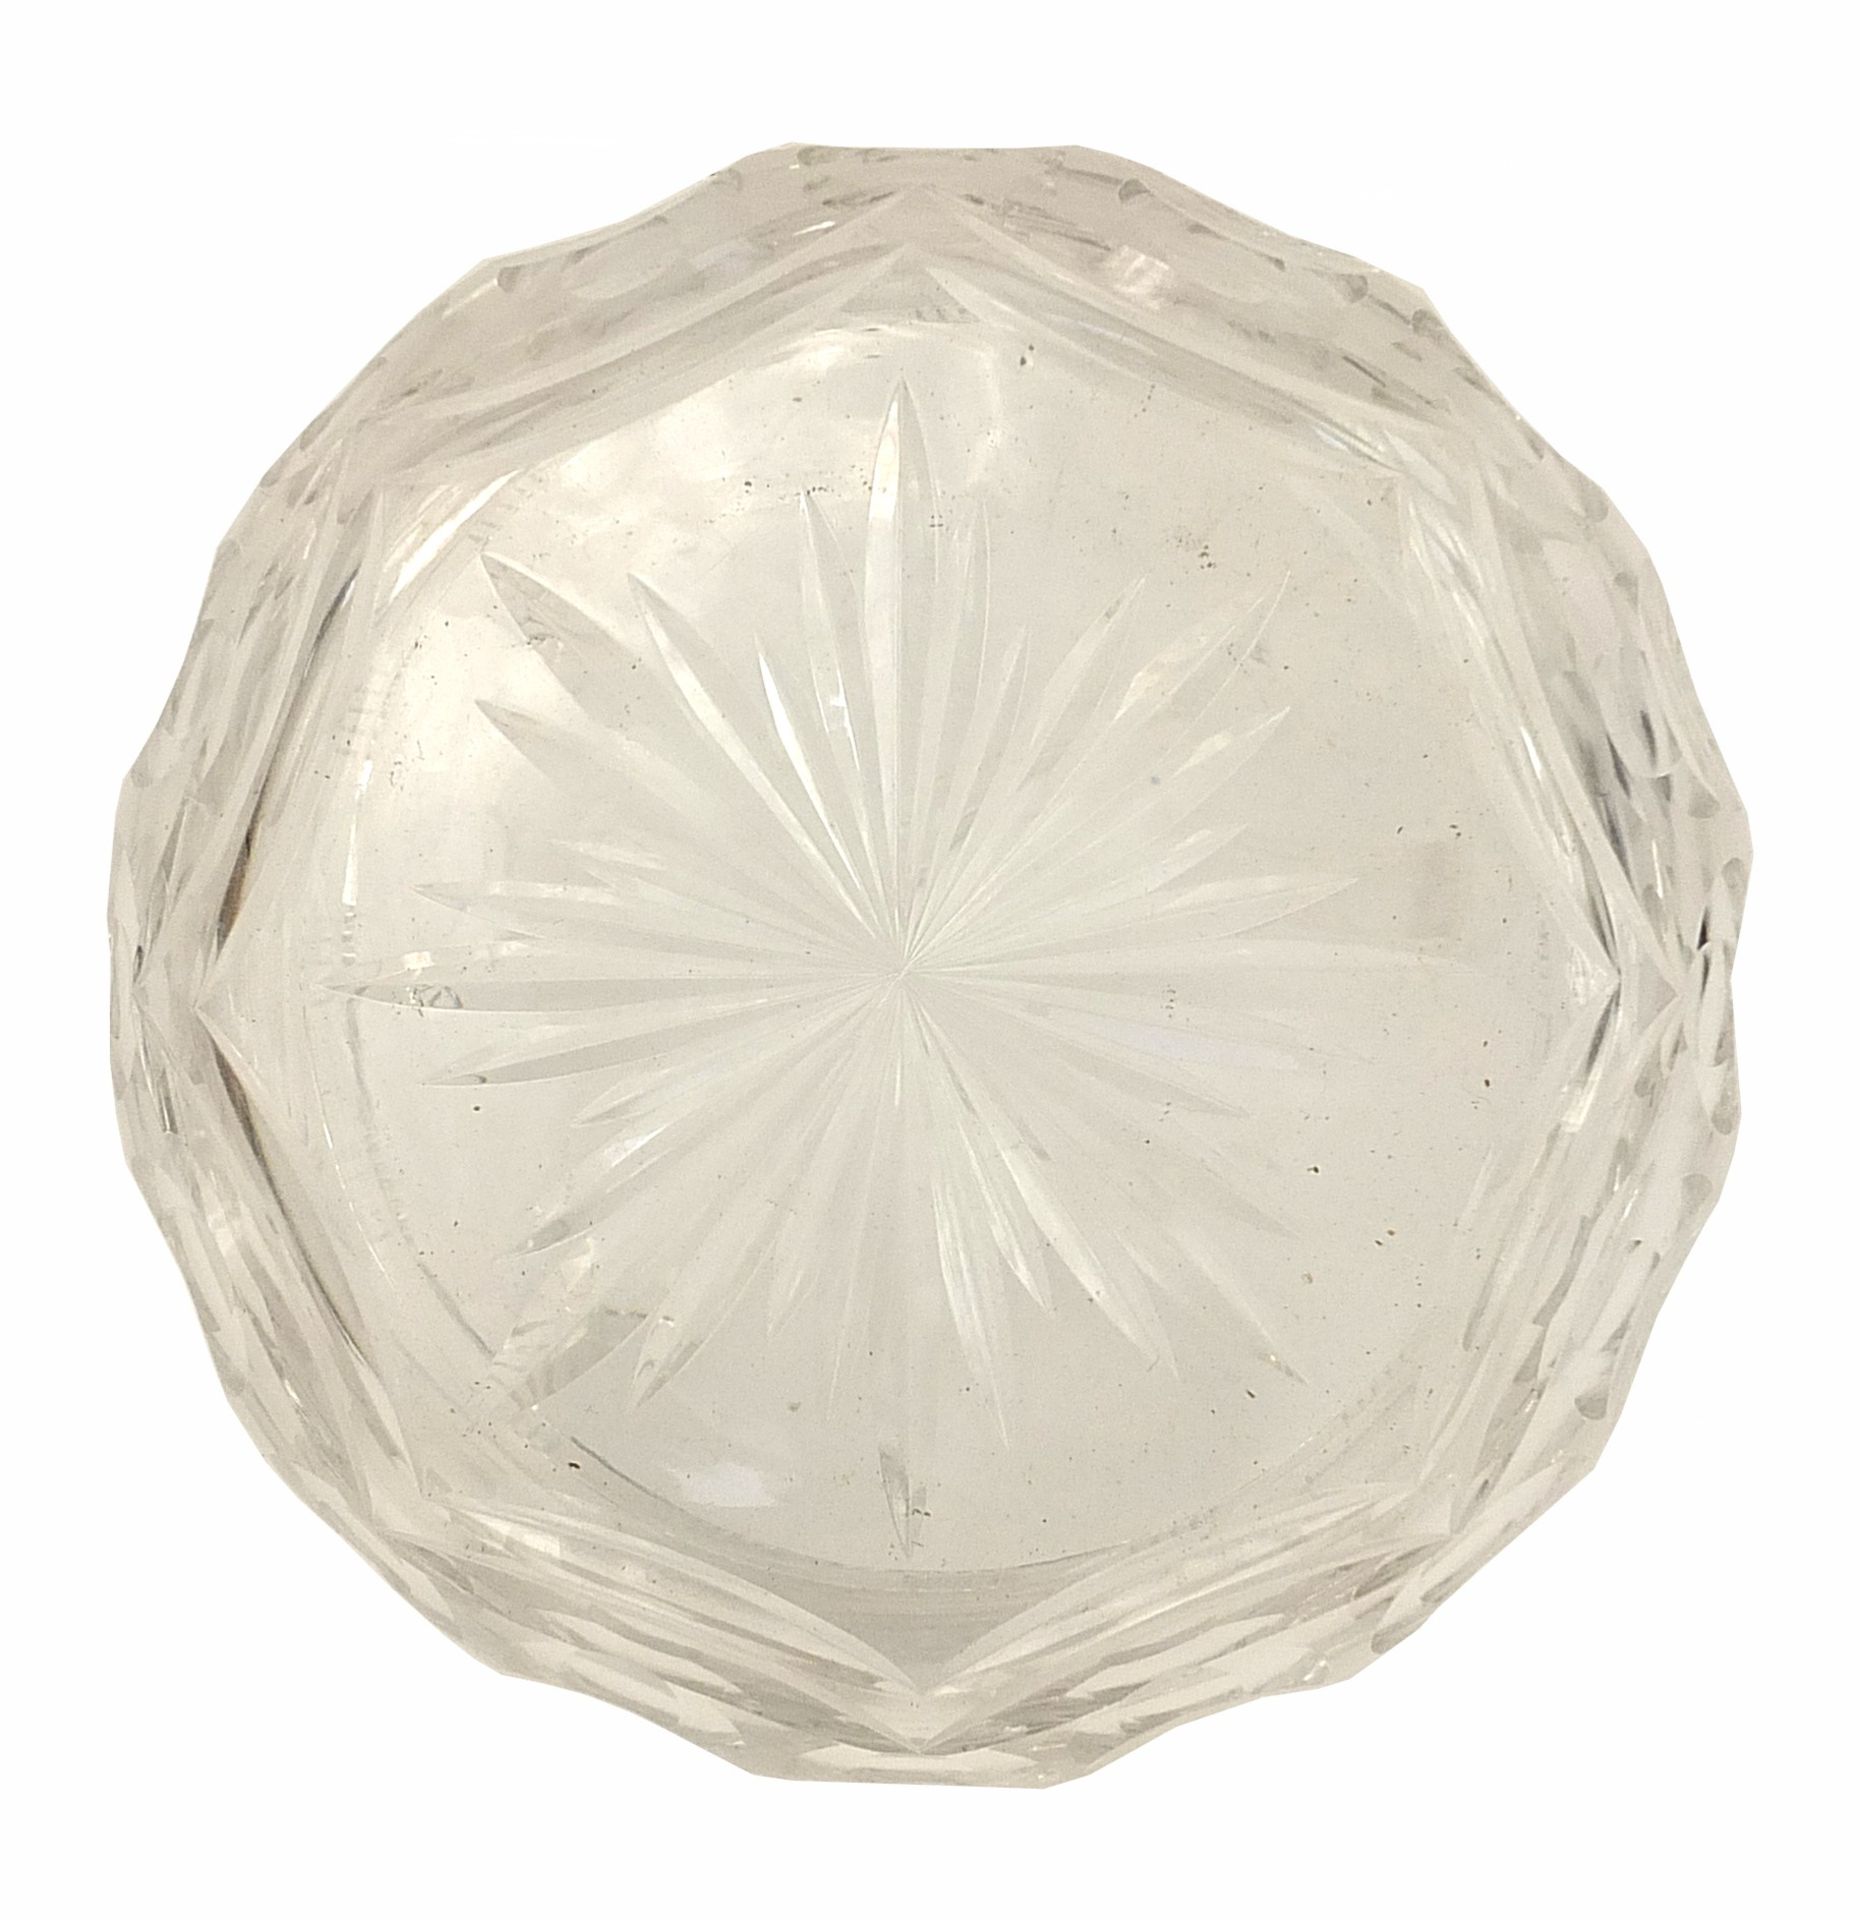 Walsh cut glass fruit bowl with star based decoration and thumbnail sides, 20cm in diameter - Bild 3 aus 3